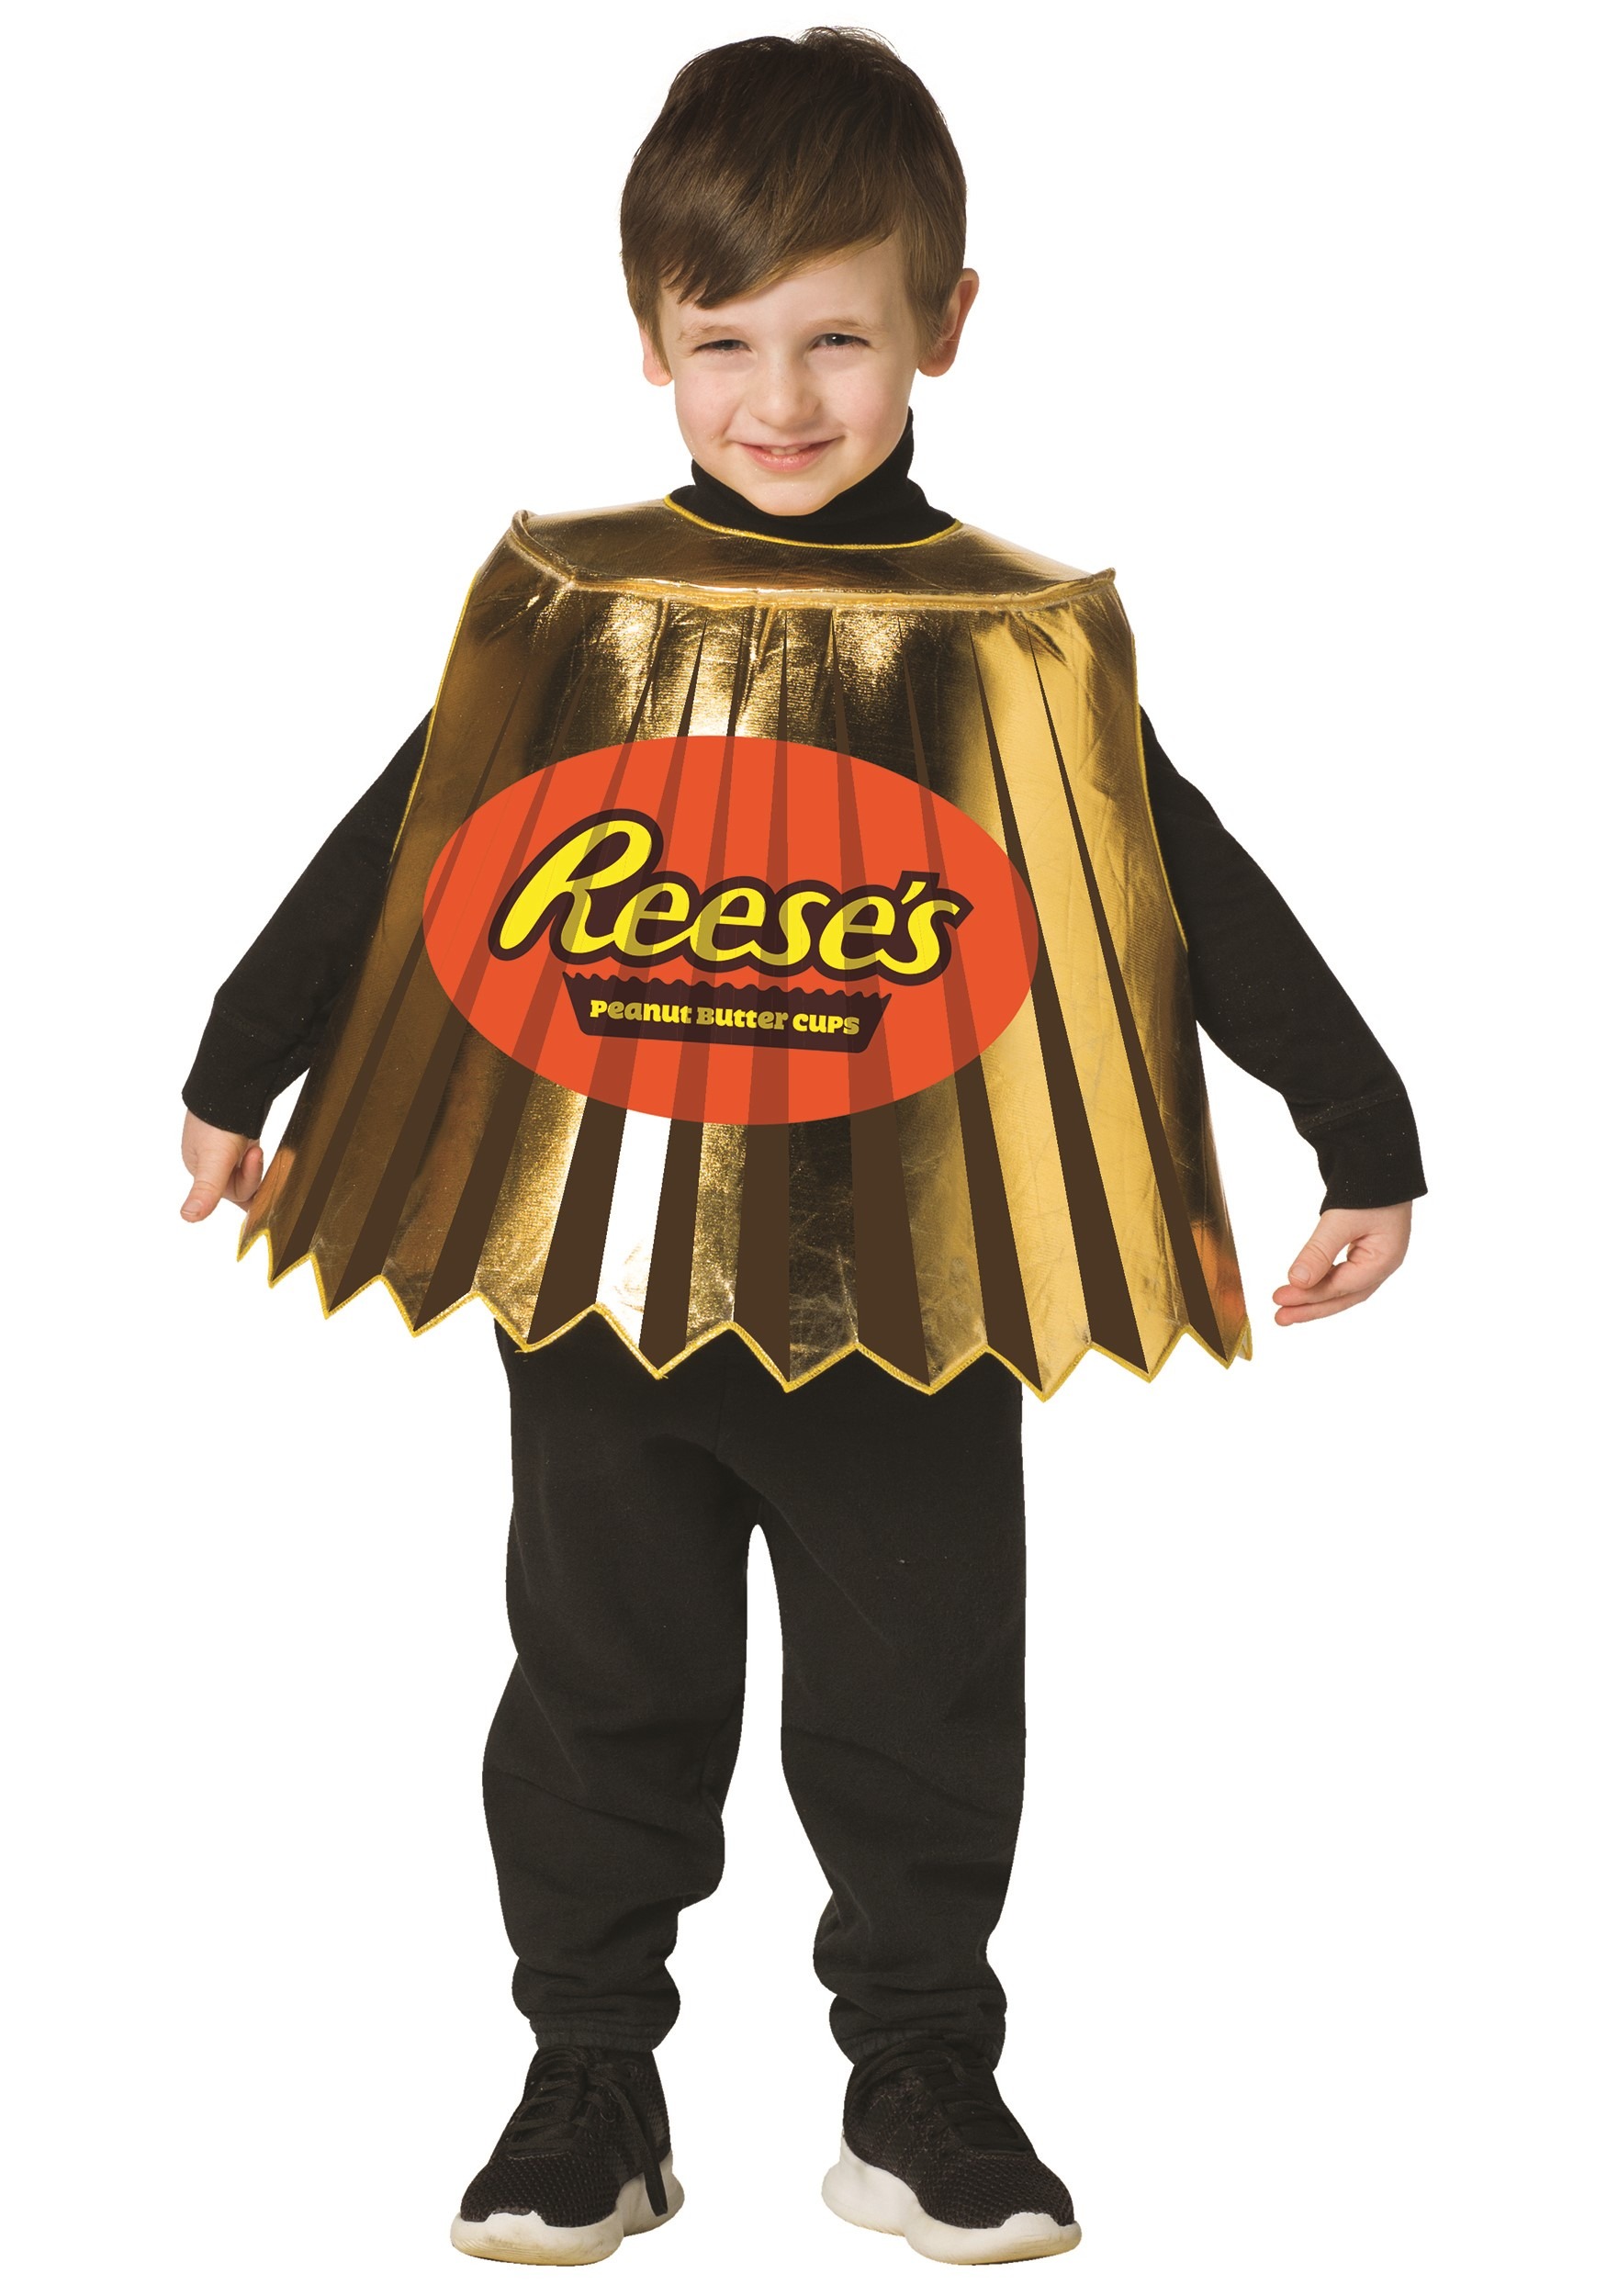 Reese's Mini Cup Costume for Kids